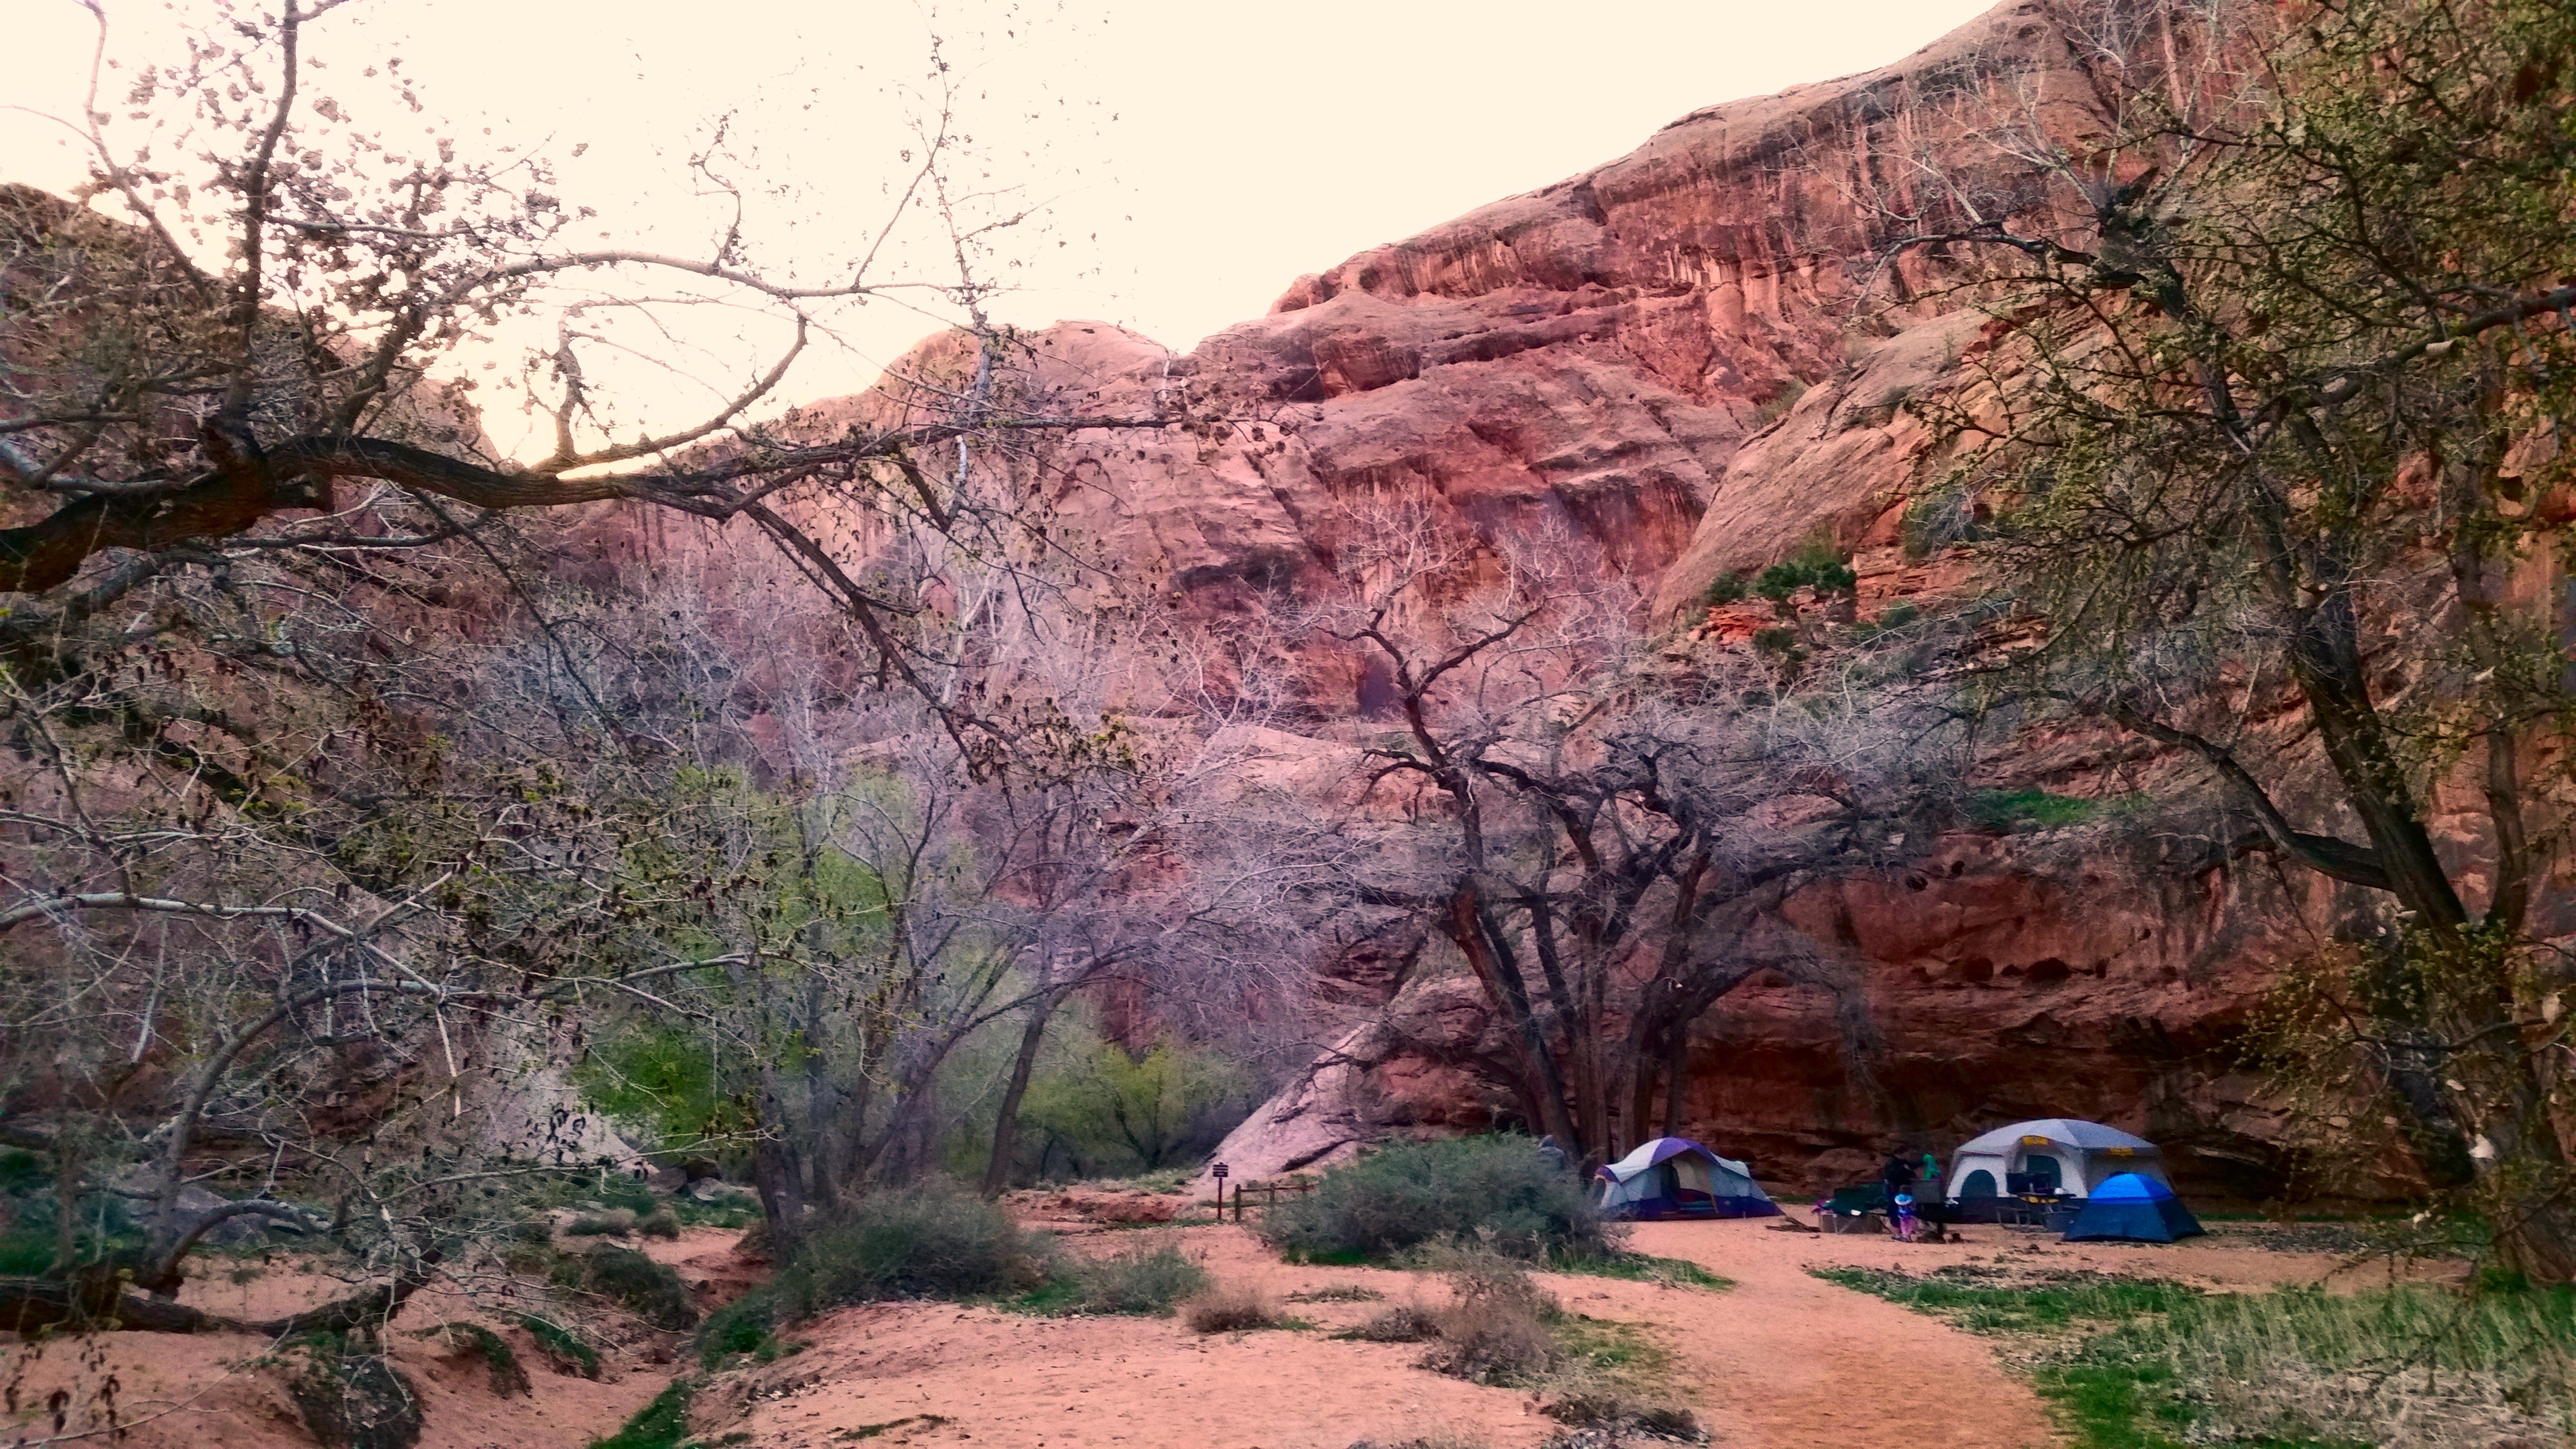 Our campsite at the foot of the cliffs.